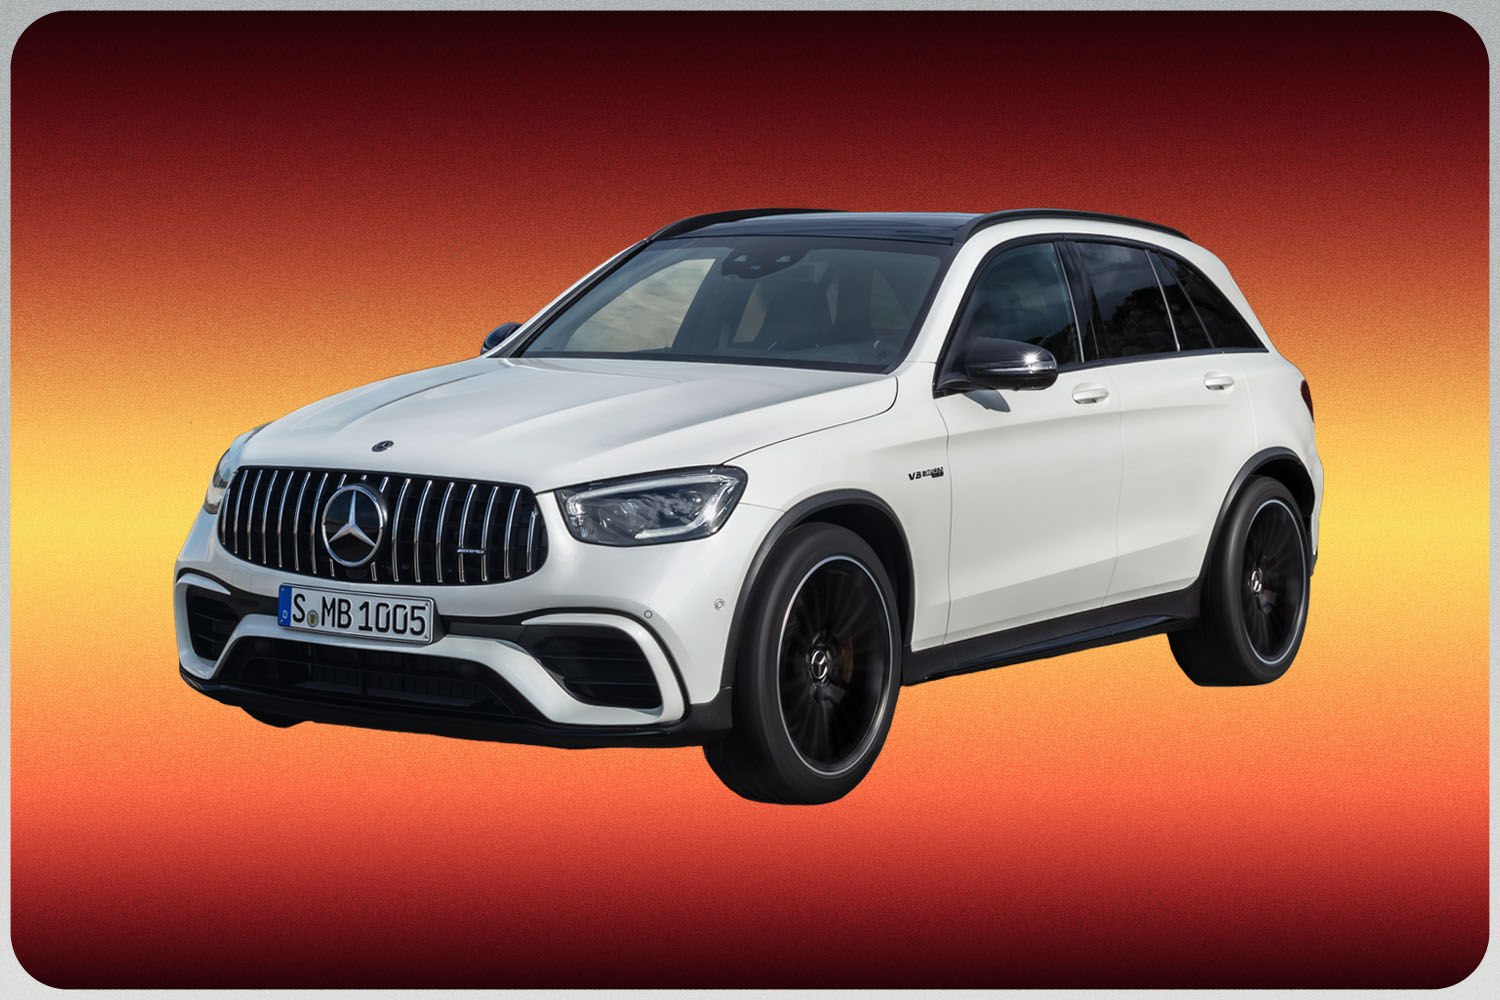 Our Pick for the Best High-Output Hooligan Luxury SUV: 2022 Mercedes-AMG GLC63 S in White